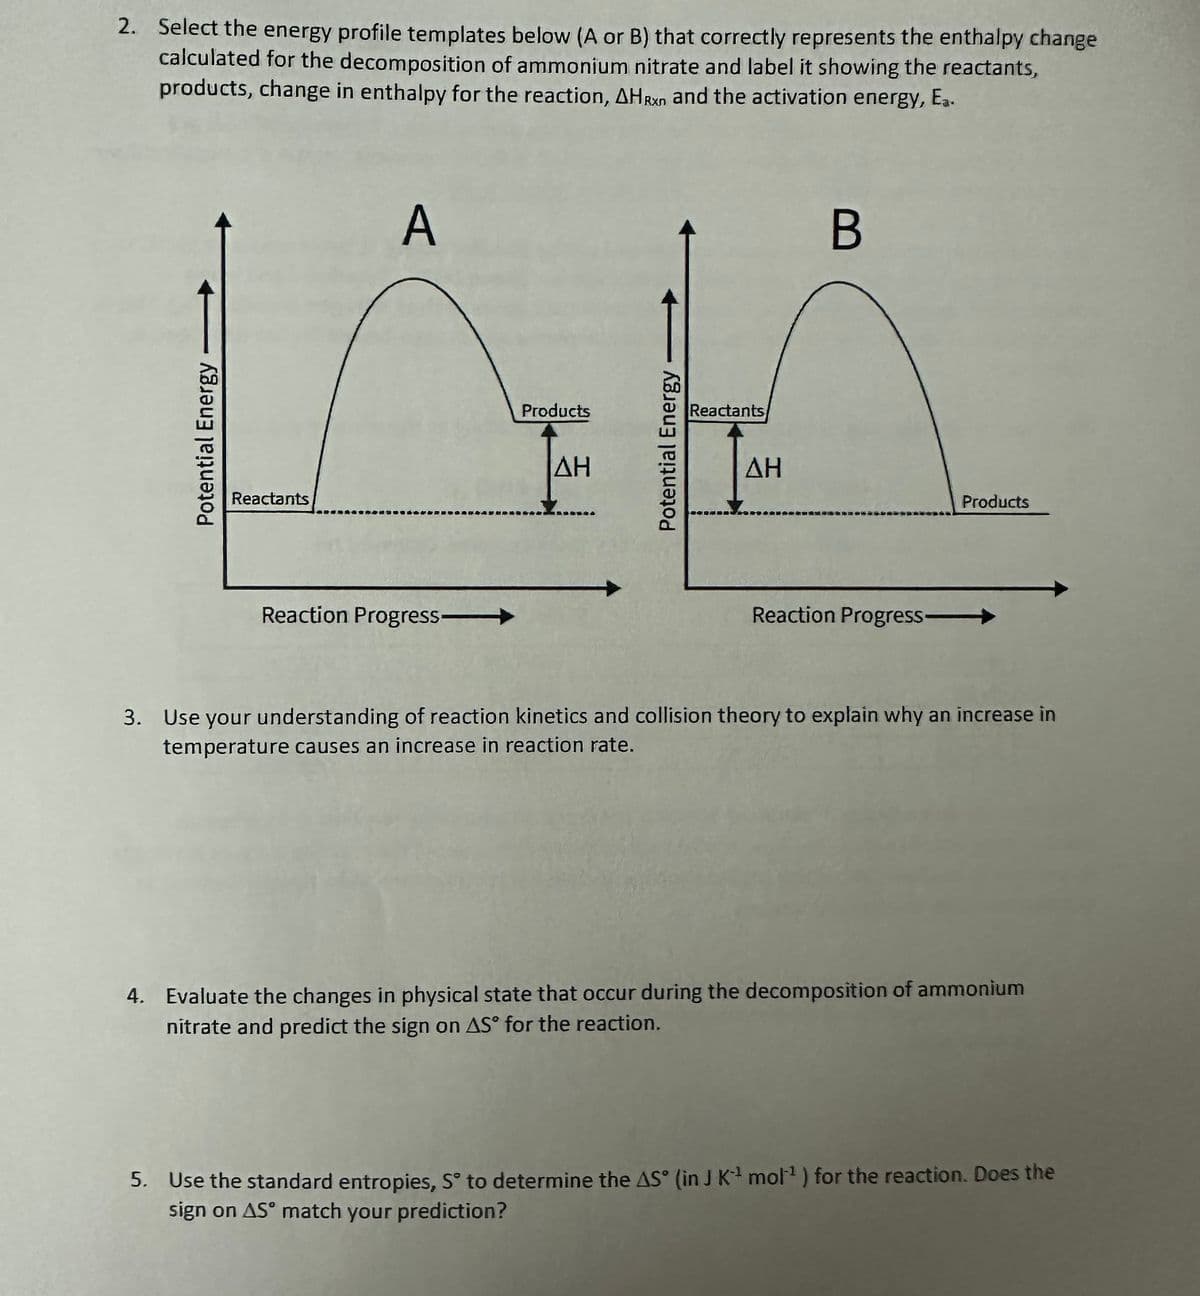 2. Select the energy profile templates below (A or B) that correctly represents the enthalpy change
calculated for the decomposition of ammonium nitrate and label it showing the reactants,
products, change in enthalpy for the reaction, AHRXn and the activation energy, Ea.
Potential Energy
Reactants
A
Reaction Progress->>
Products
ΔΗ
Potential Energy
Reactants
ΔΗ
B
Products
Reaction Progress->
3. Use your understanding of reaction kinetics and collision theory to explain why an increase in
temperature causes an increase in reaction rate.
4. Evaluate the changes in physical state that occur during the decomposition of ammonium
nitrate and predict the sign on AS for the reaction.
5. Use the standard entropies, S° to determine the AS (in J K-¹ mol¹ ) for the reaction. Does the
sign on AS match your prediction?